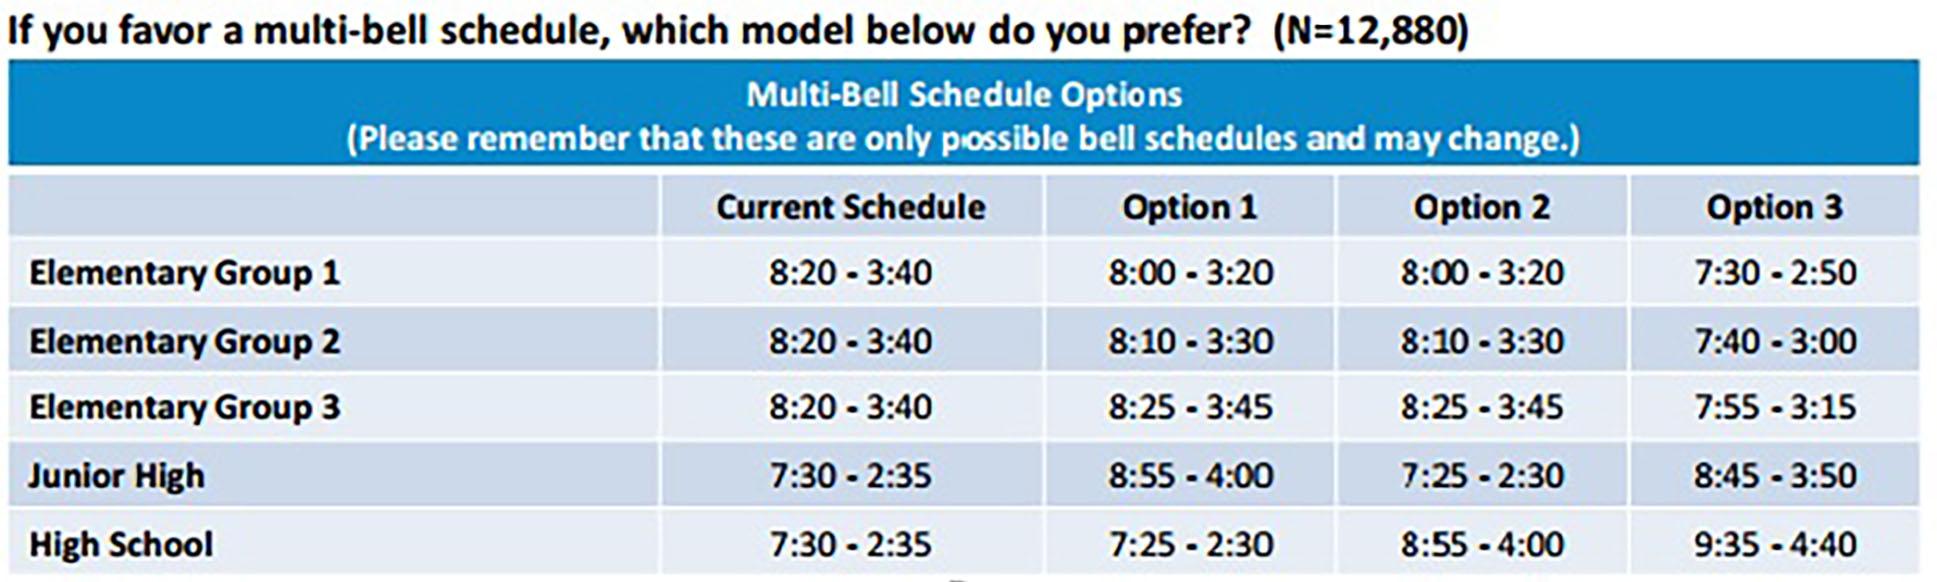 The survey offered community members three alternate start times. Overall, respondents preferred to leave schedules the same, but when asked to choose,  Option 1 was most popular.